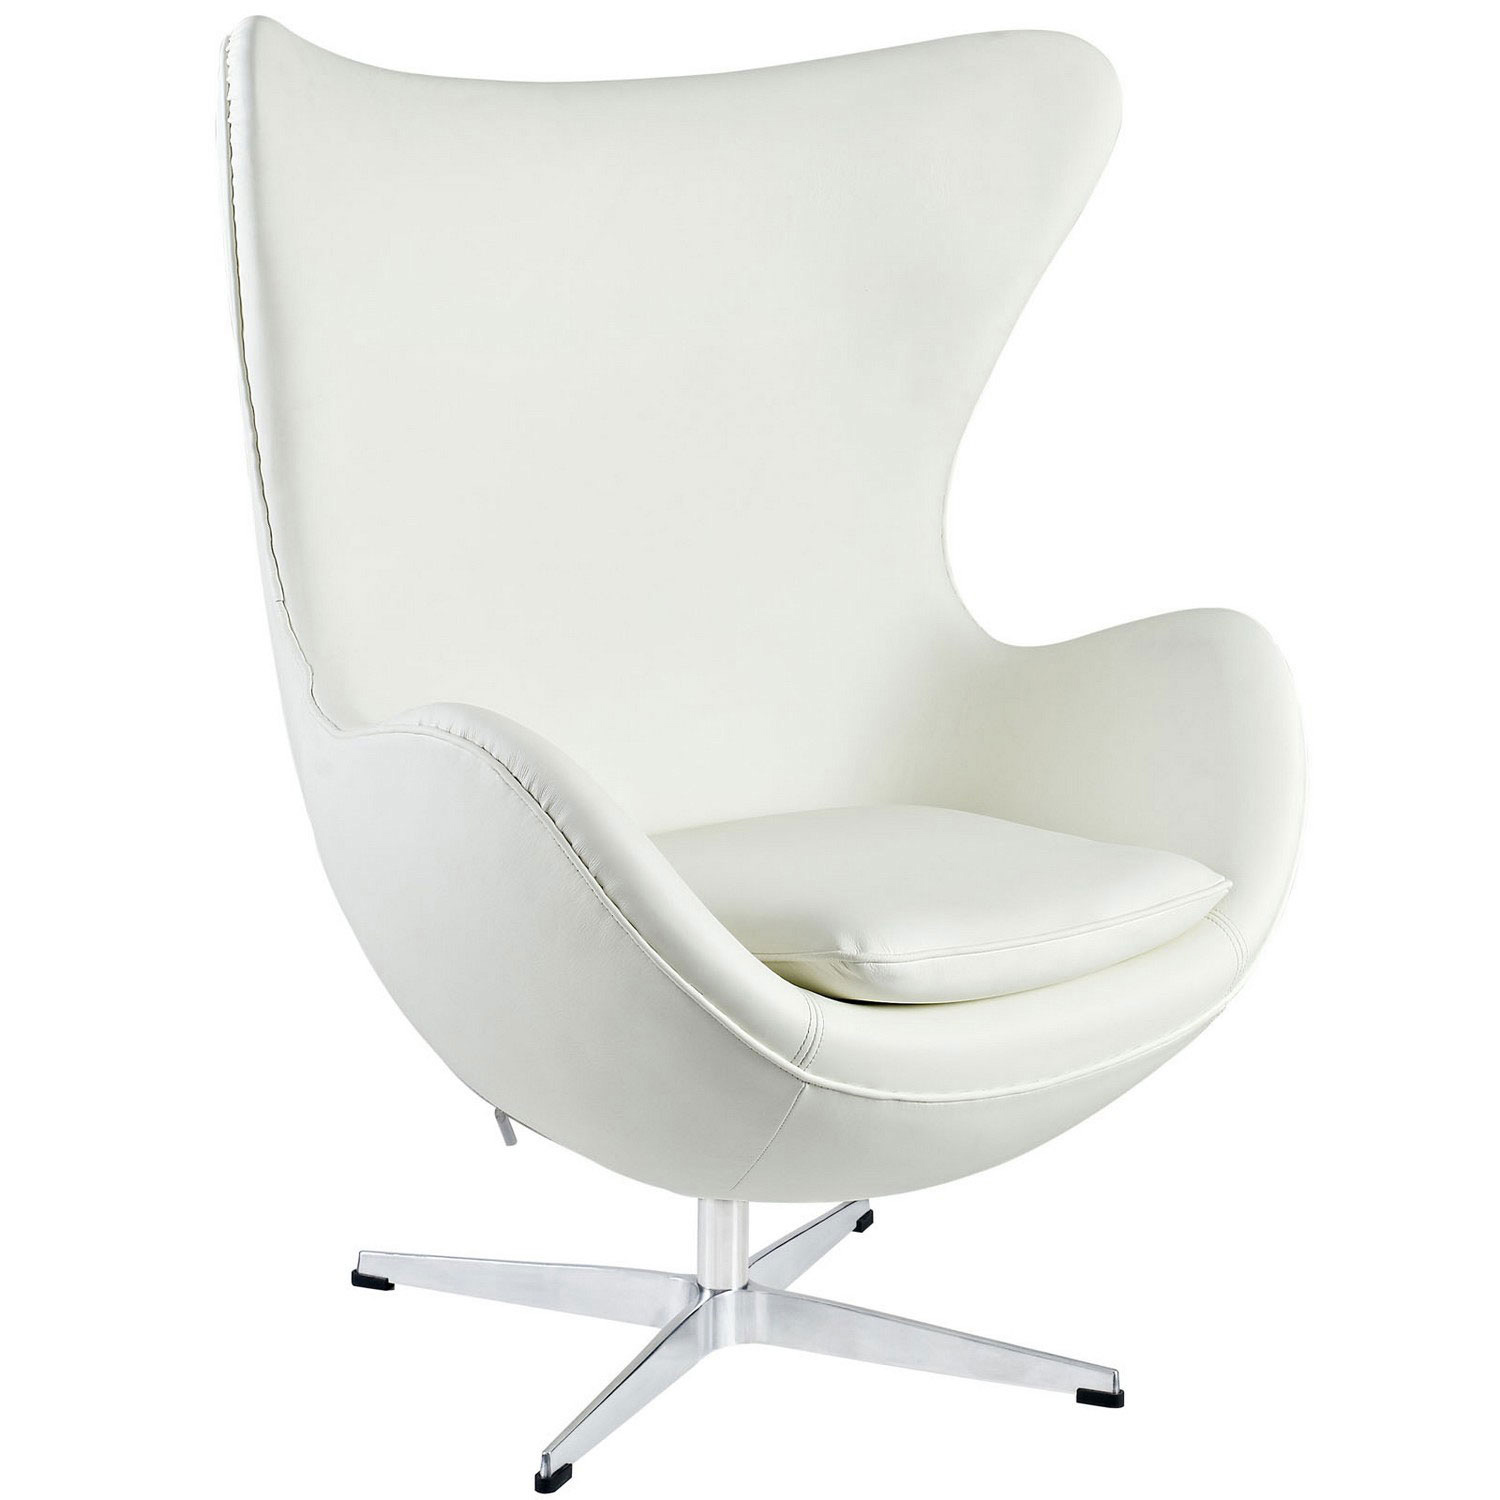 Modway Glove Leather Lounge Chair - White